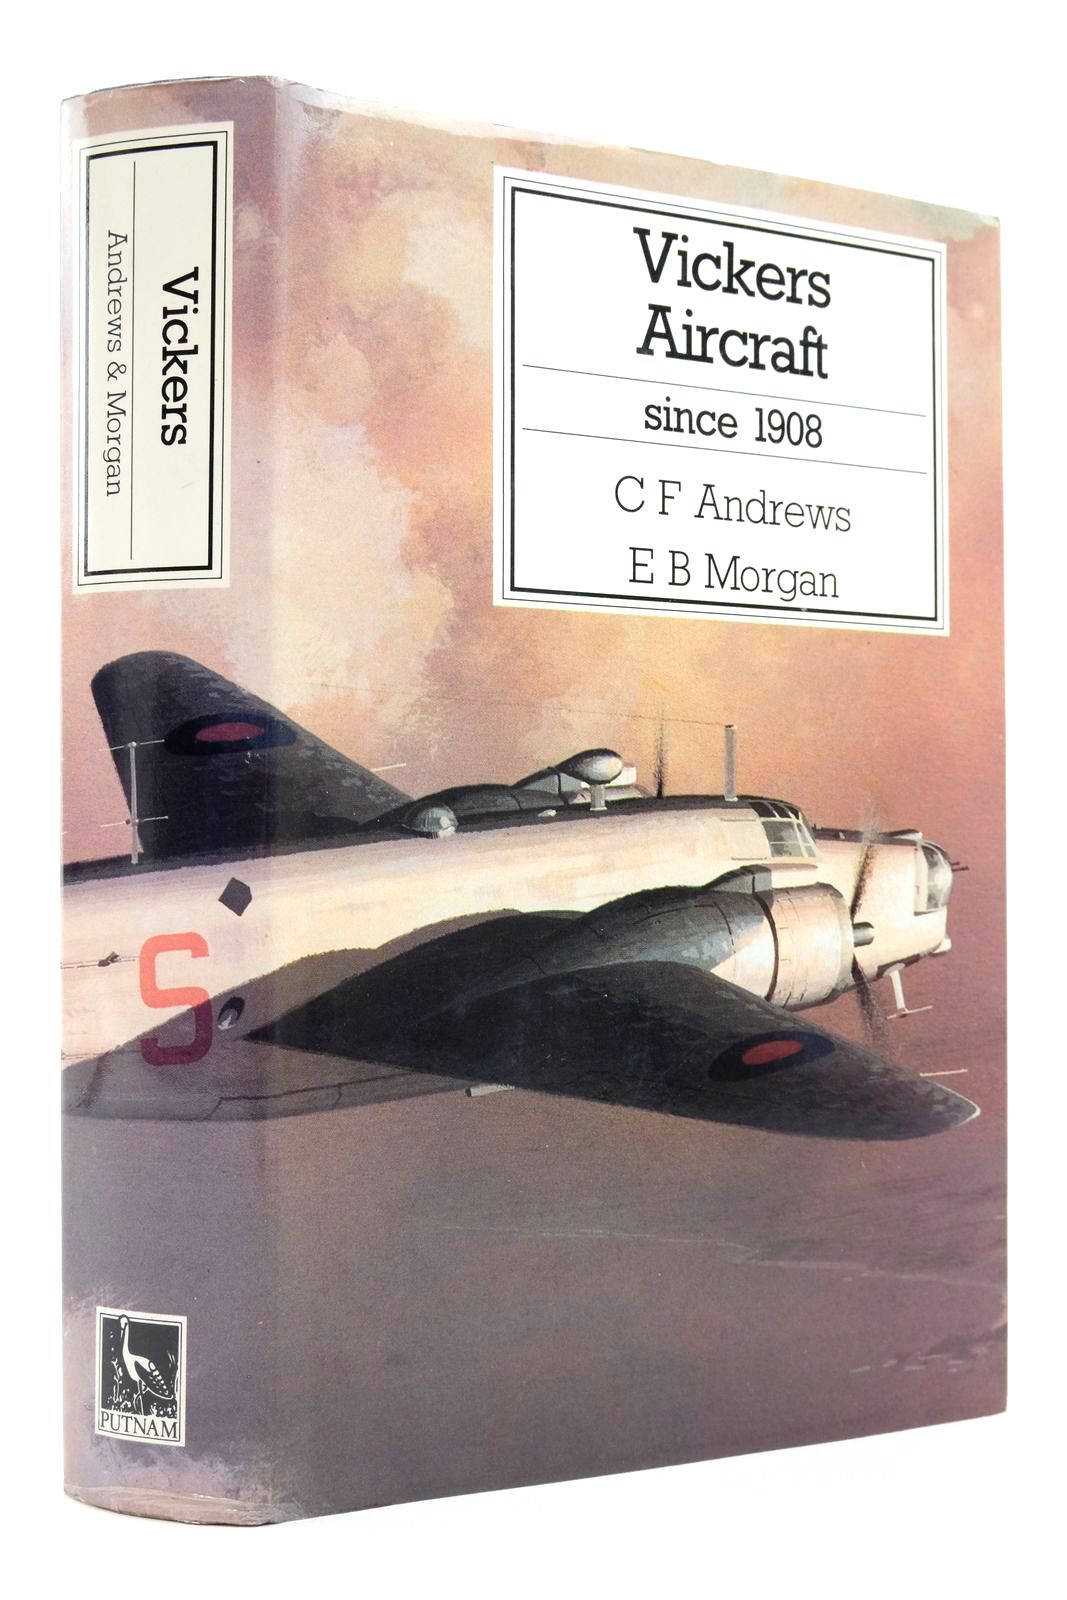 Photo of VICKERS AIRCRAFT SINCE 1908 written by Andrews, C.F. Morgan, Eric B. published by Putnam (STOCK CODE: 2138488)  for sale by Stella & Rose's Books